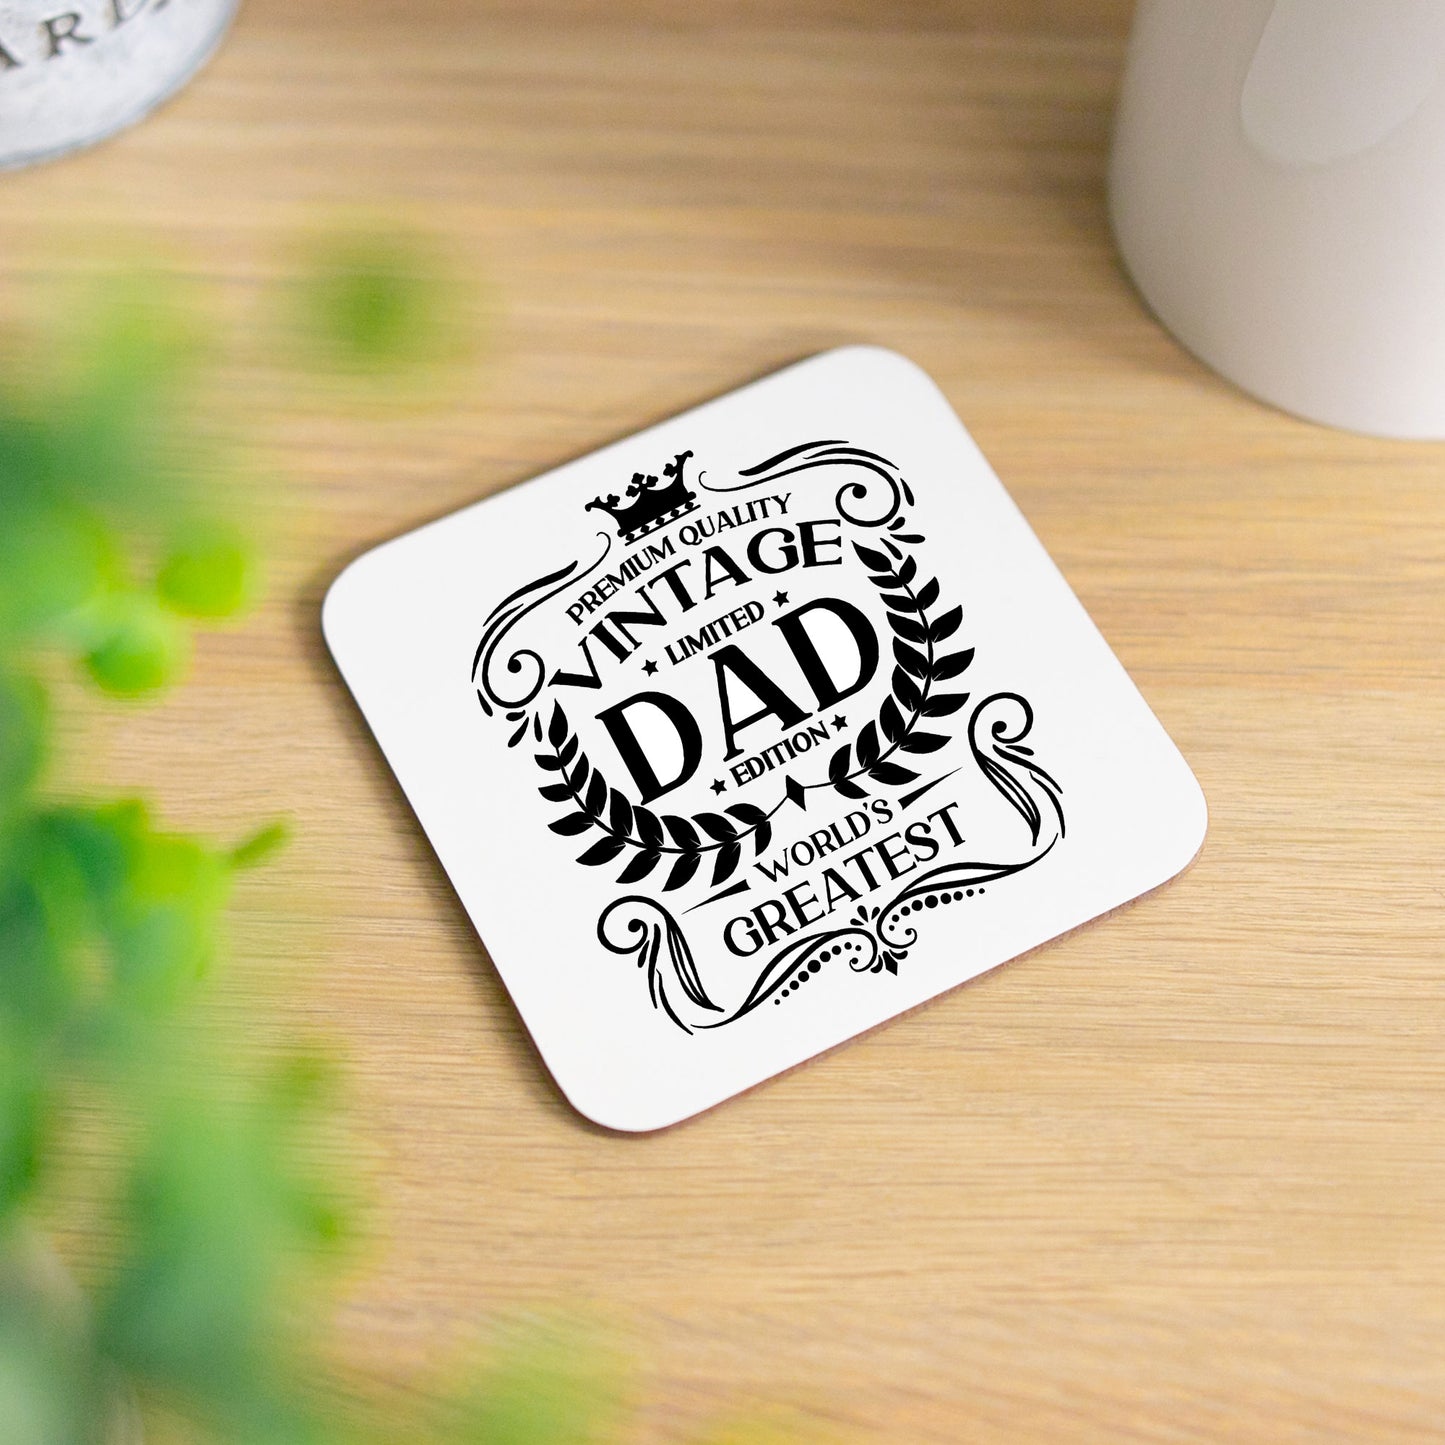 Vintage World's Greatest Dad Engraved Stemless Gin Glass Gift  - Always Looking Good - Glass & Printed Coaster  